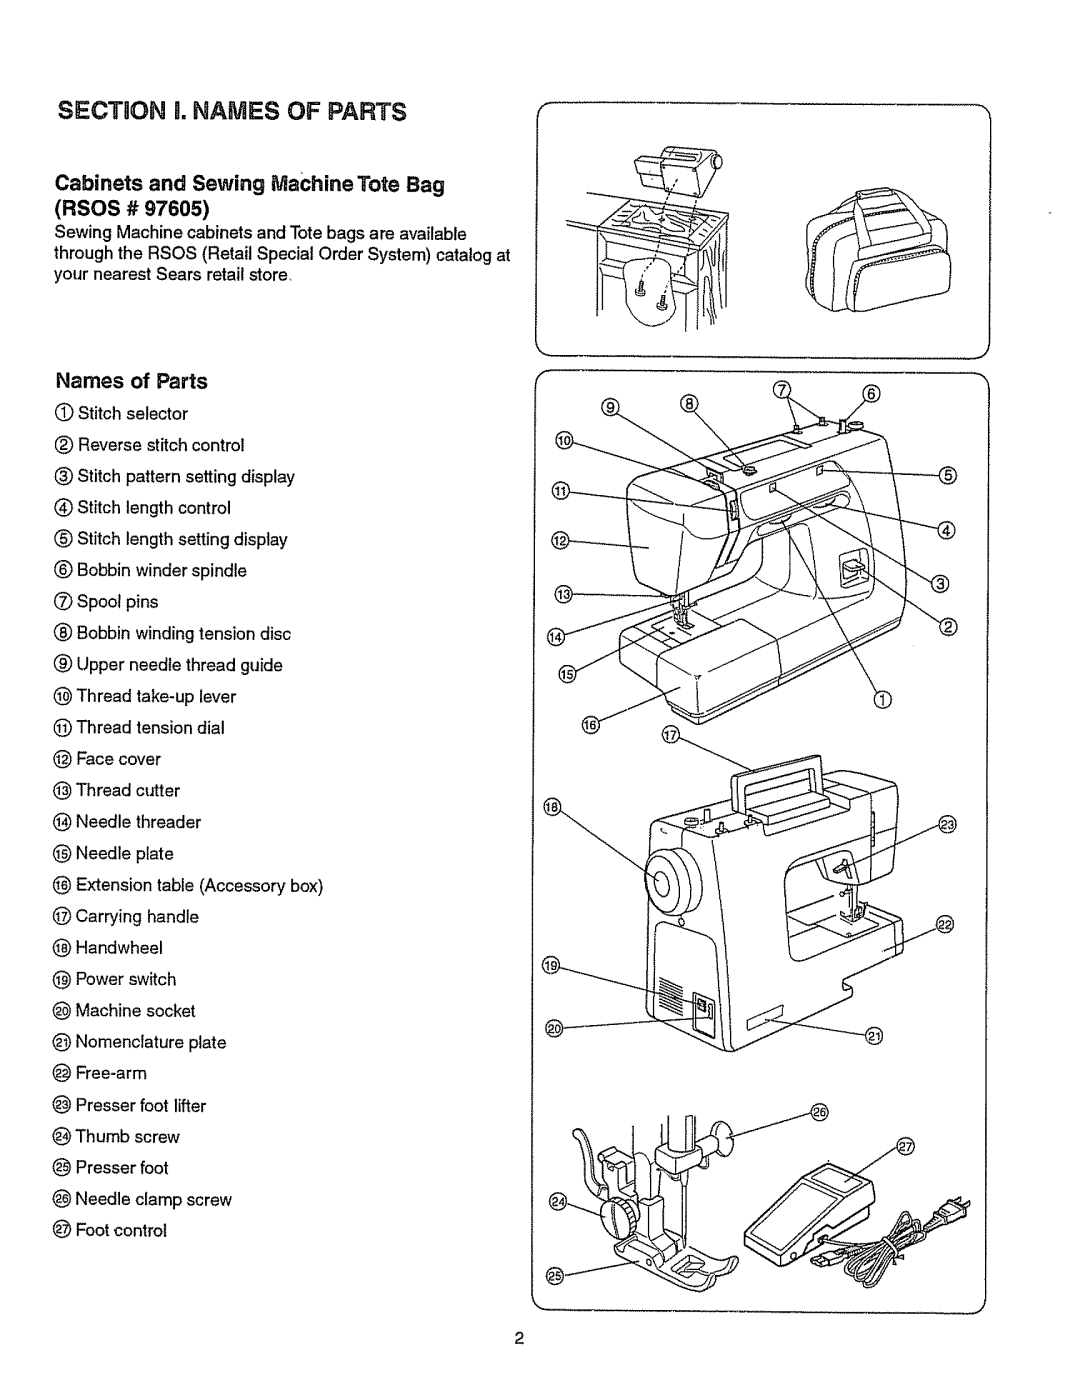 Kenmore 385.151082 owner manual Cabinets and Sewing Machine Tote Bag, Names of Parts, Rsos #, Needle plate 